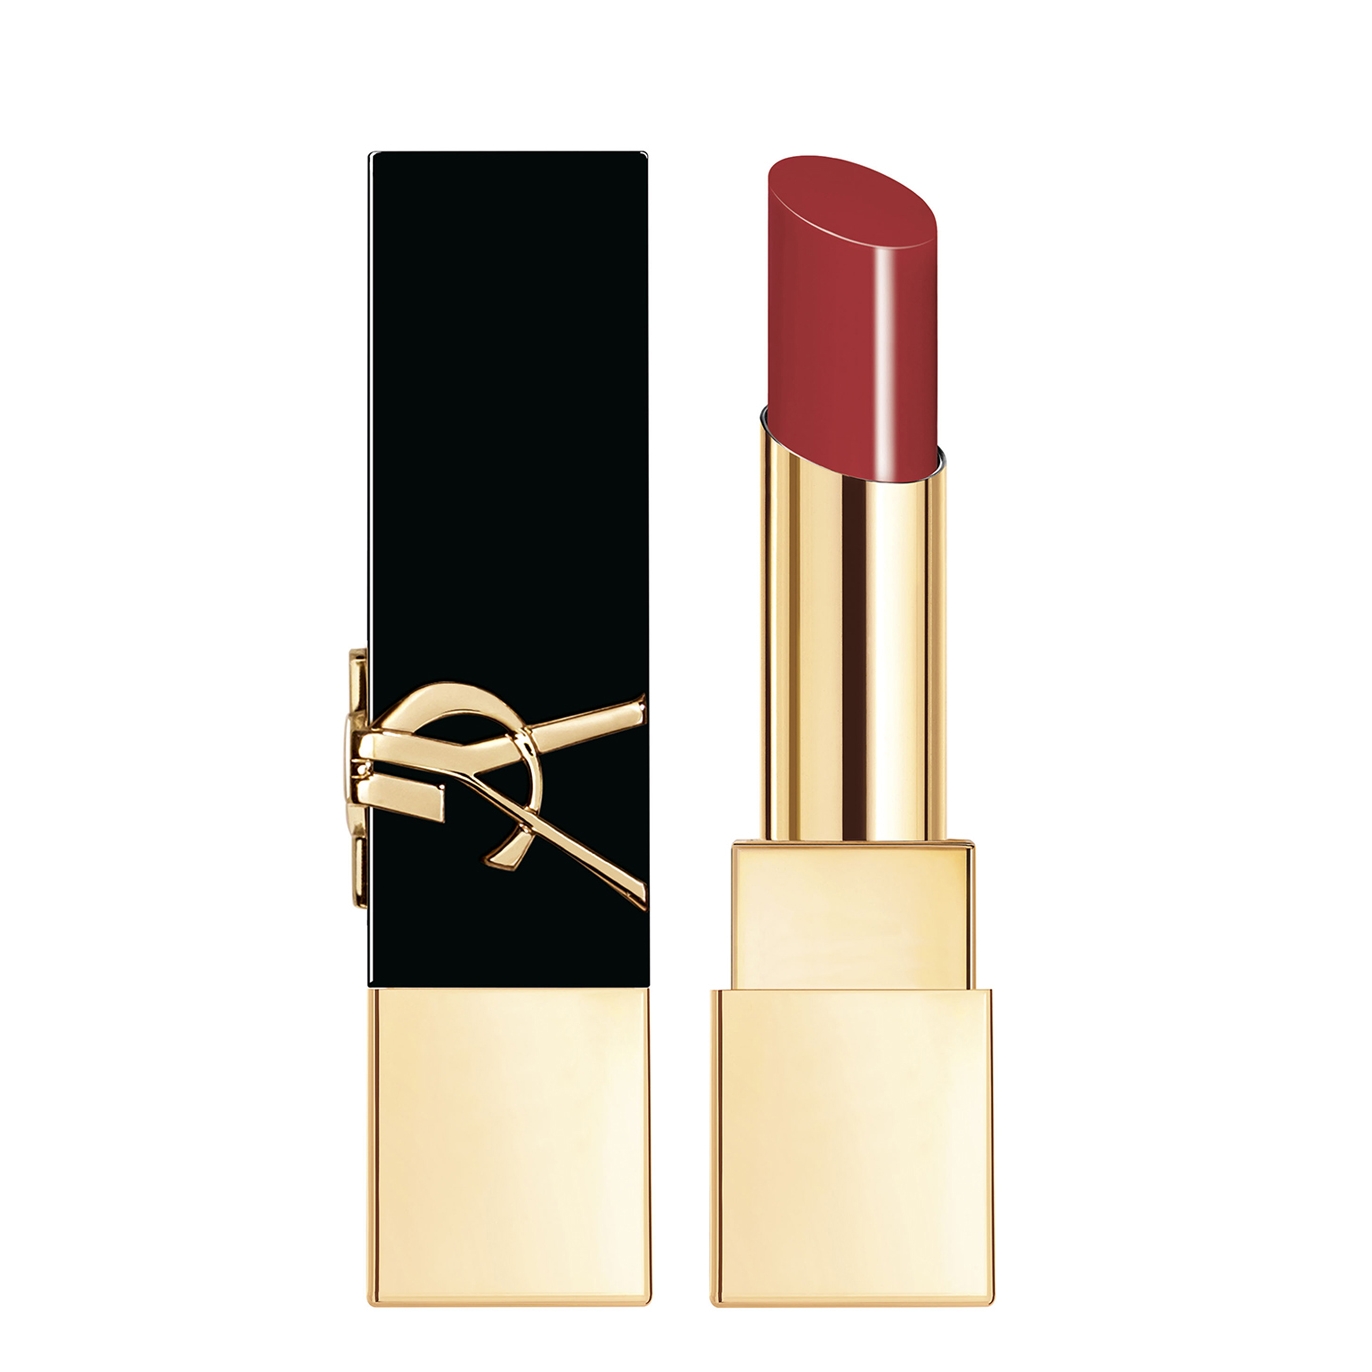 Yves Saint Laurent The Bold Lipstick - 11 Frontal Nude